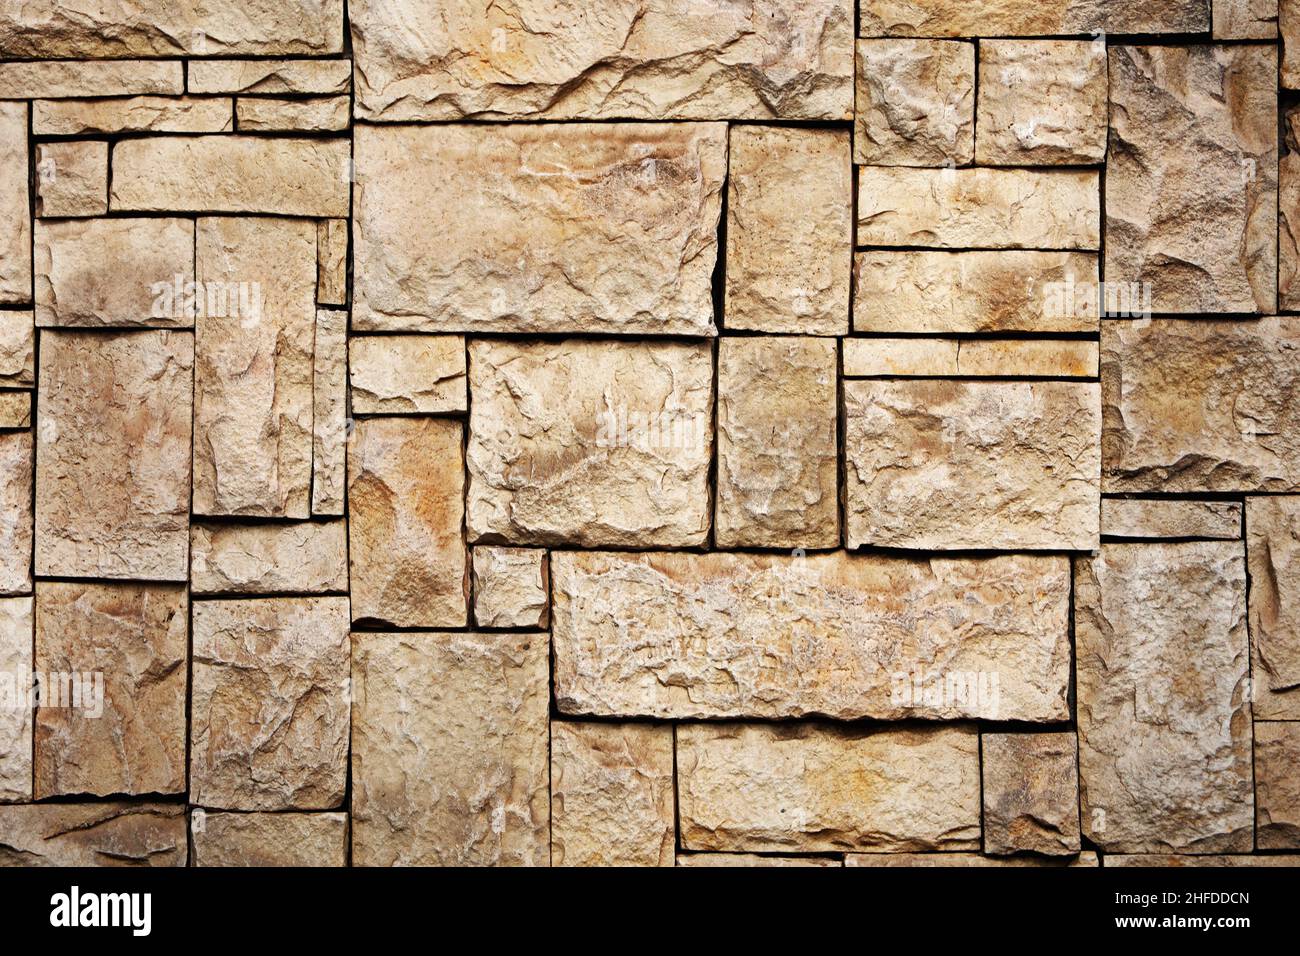 Photograph for wall background material using stones of various sizes Stock Photo